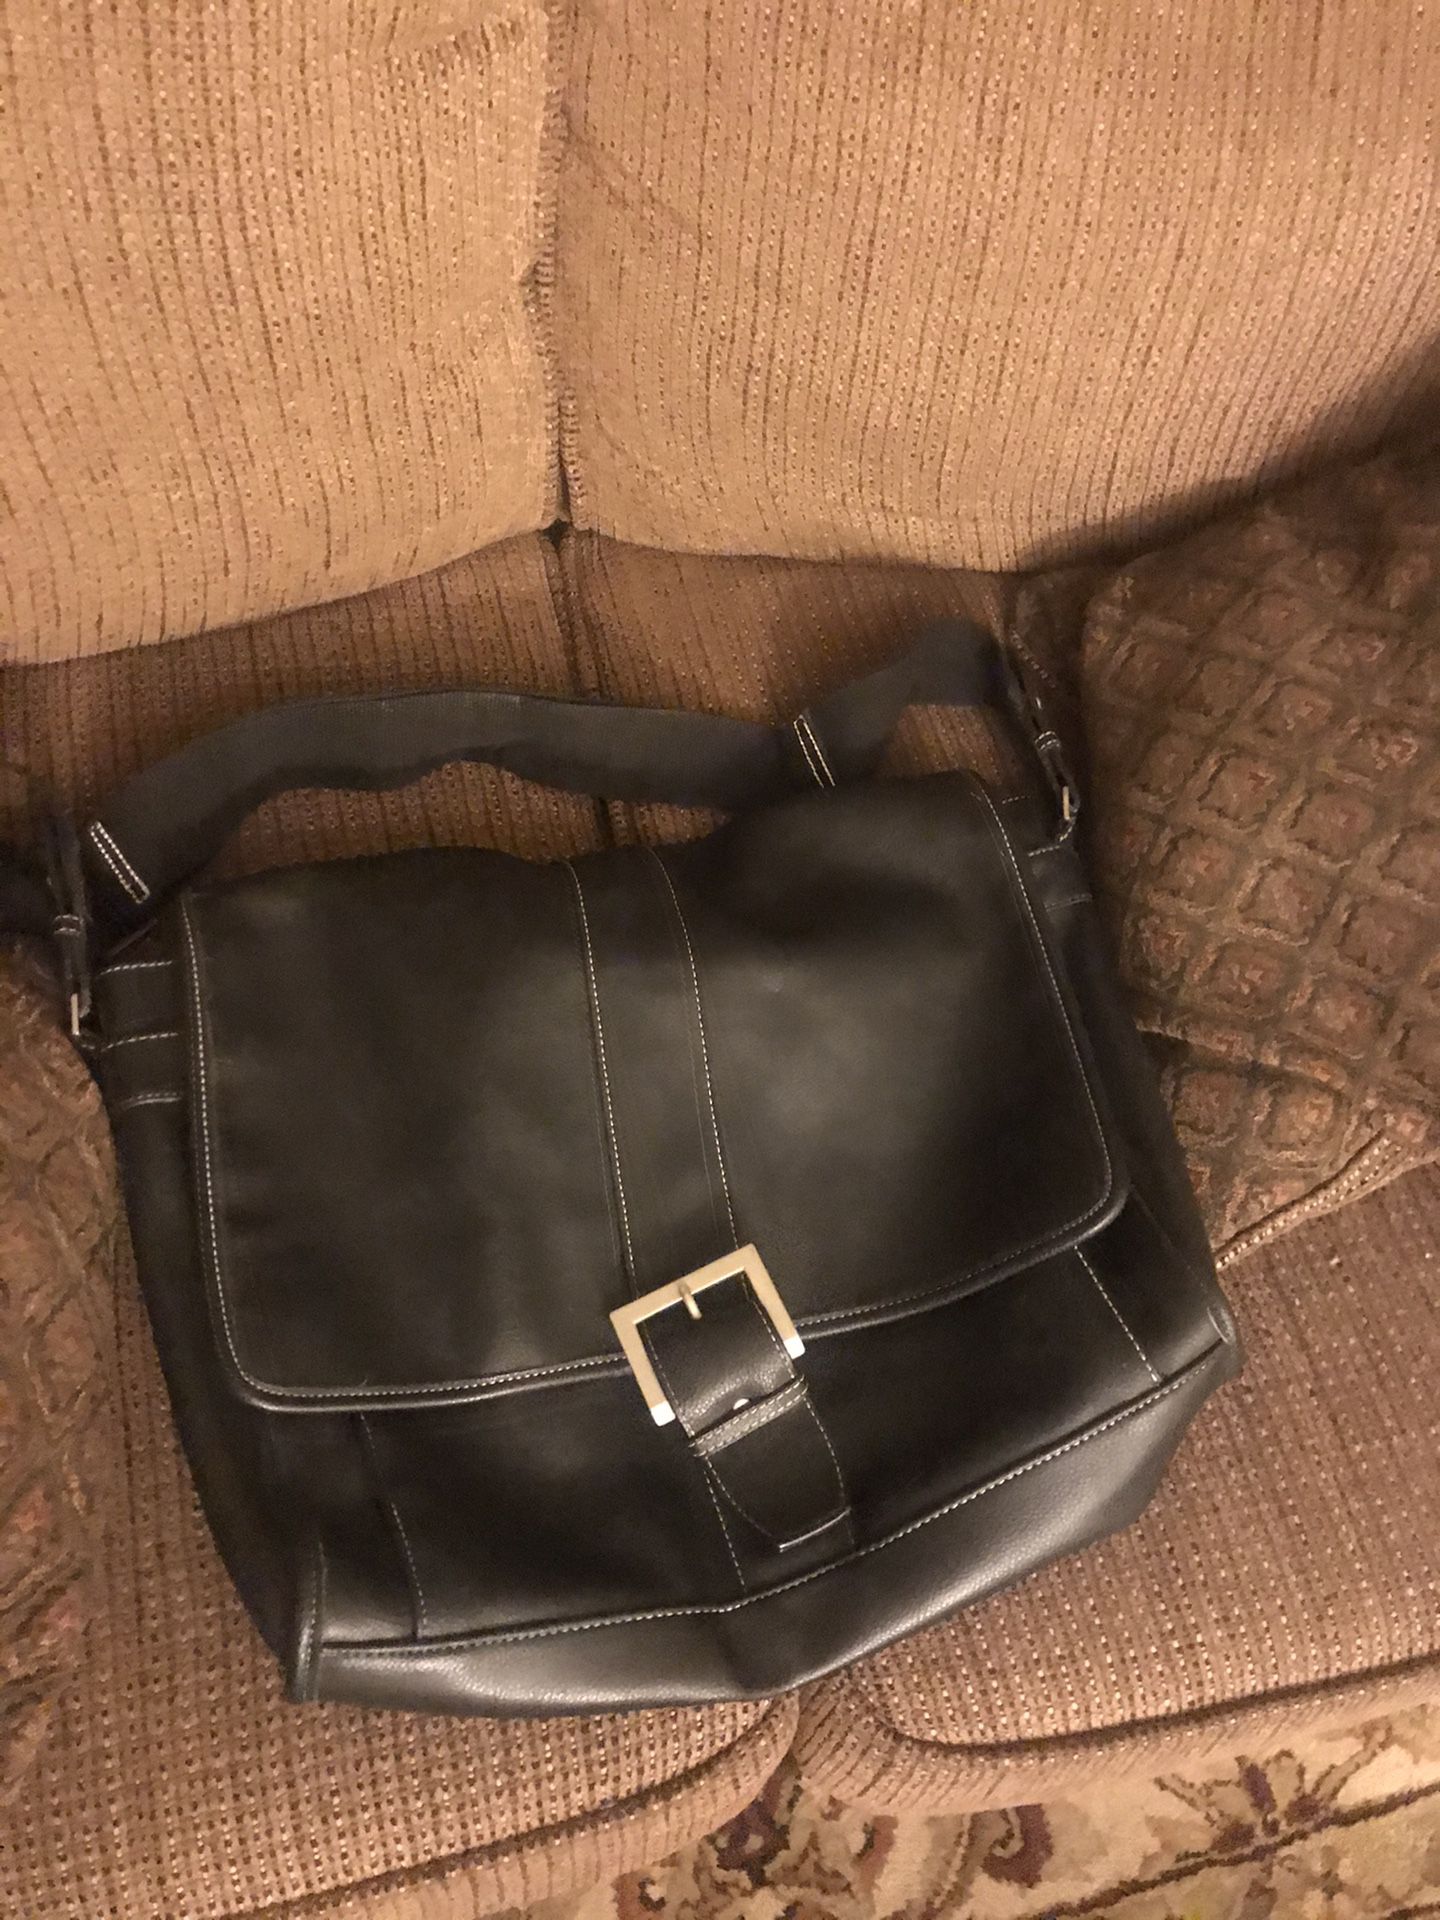 leather messenger bag from Kenneth Cole.